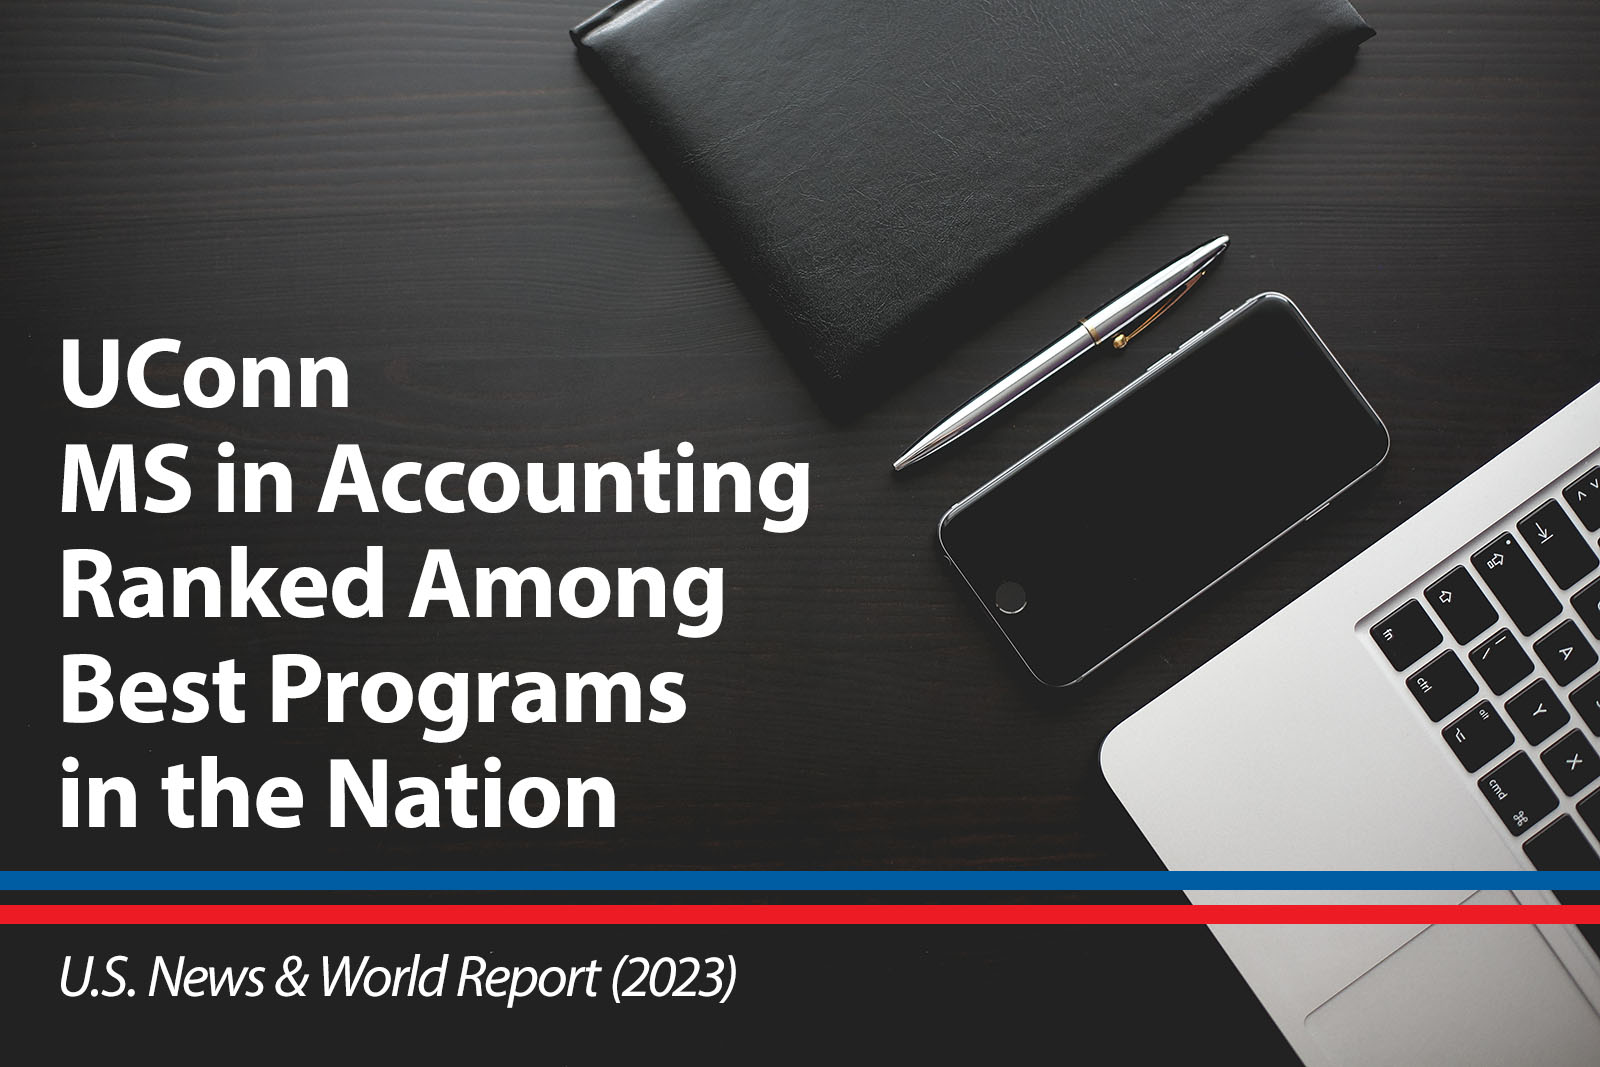 UConn Master of Science in Accounting ranked among the best programs in the nation by U.S. News and World Report 2023